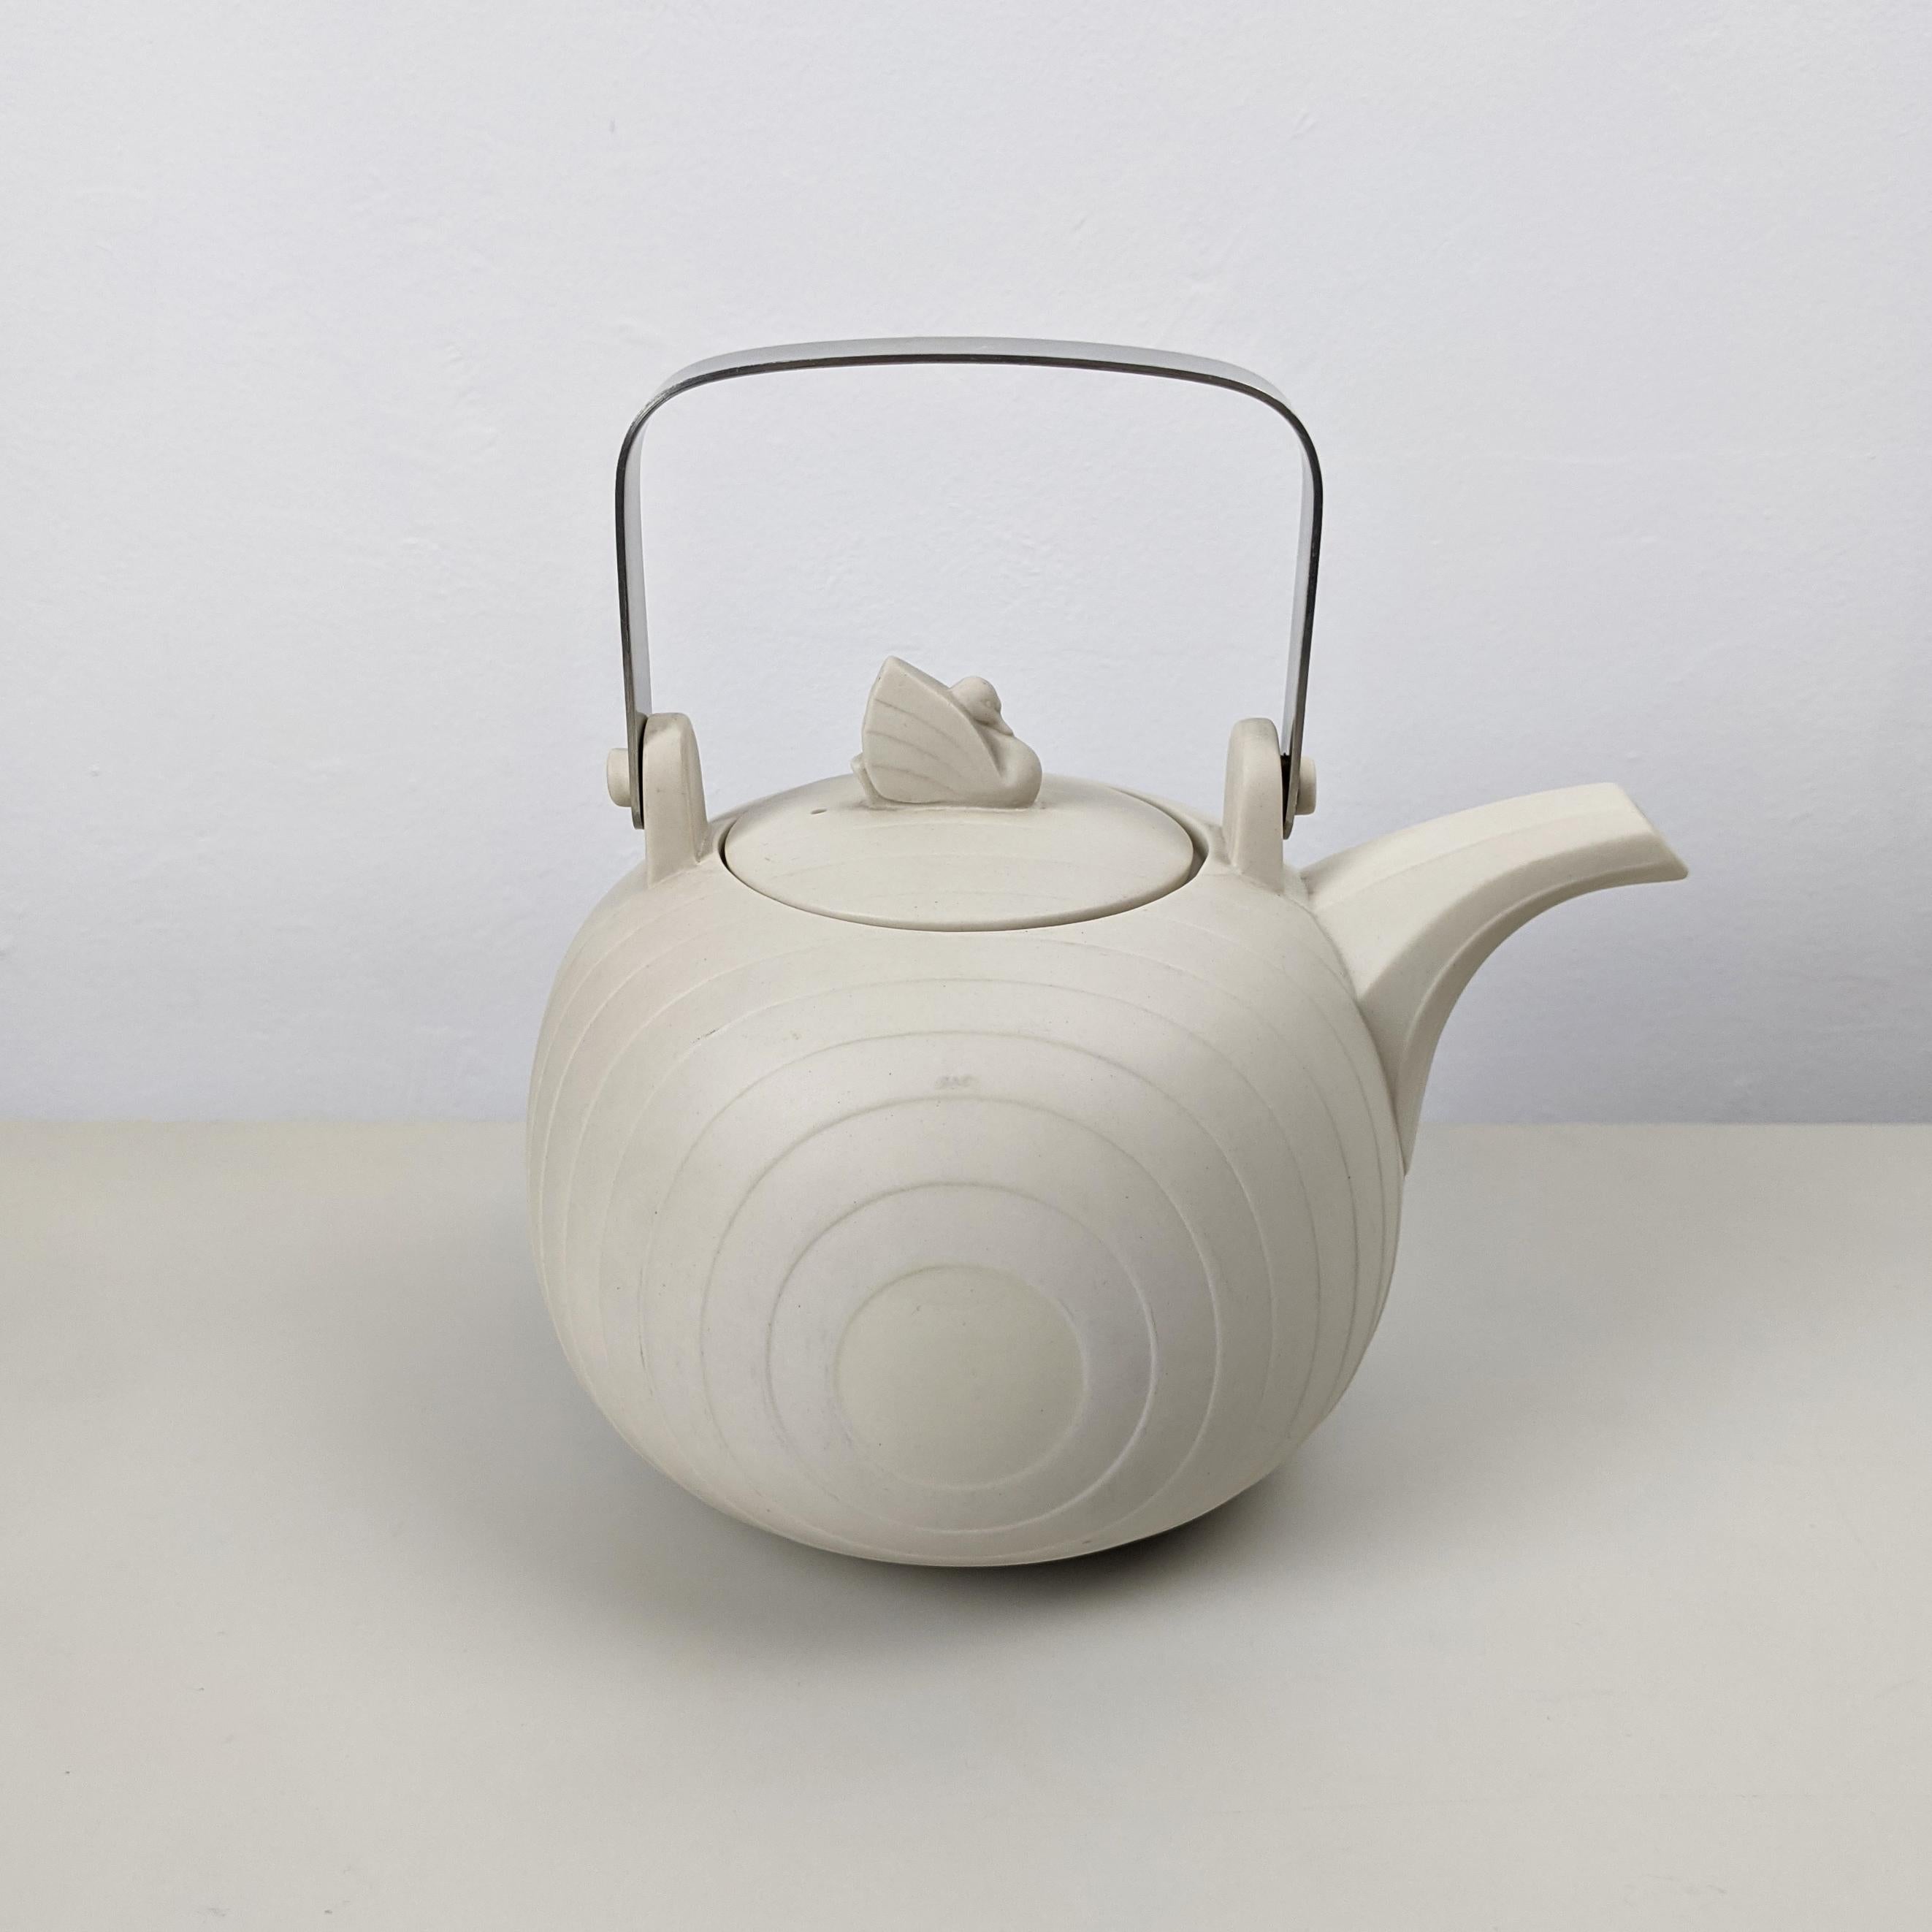 Ceramic Hornsea Teapot from the ‘Concept’ Series, Designed 1977 by Martin Hunt